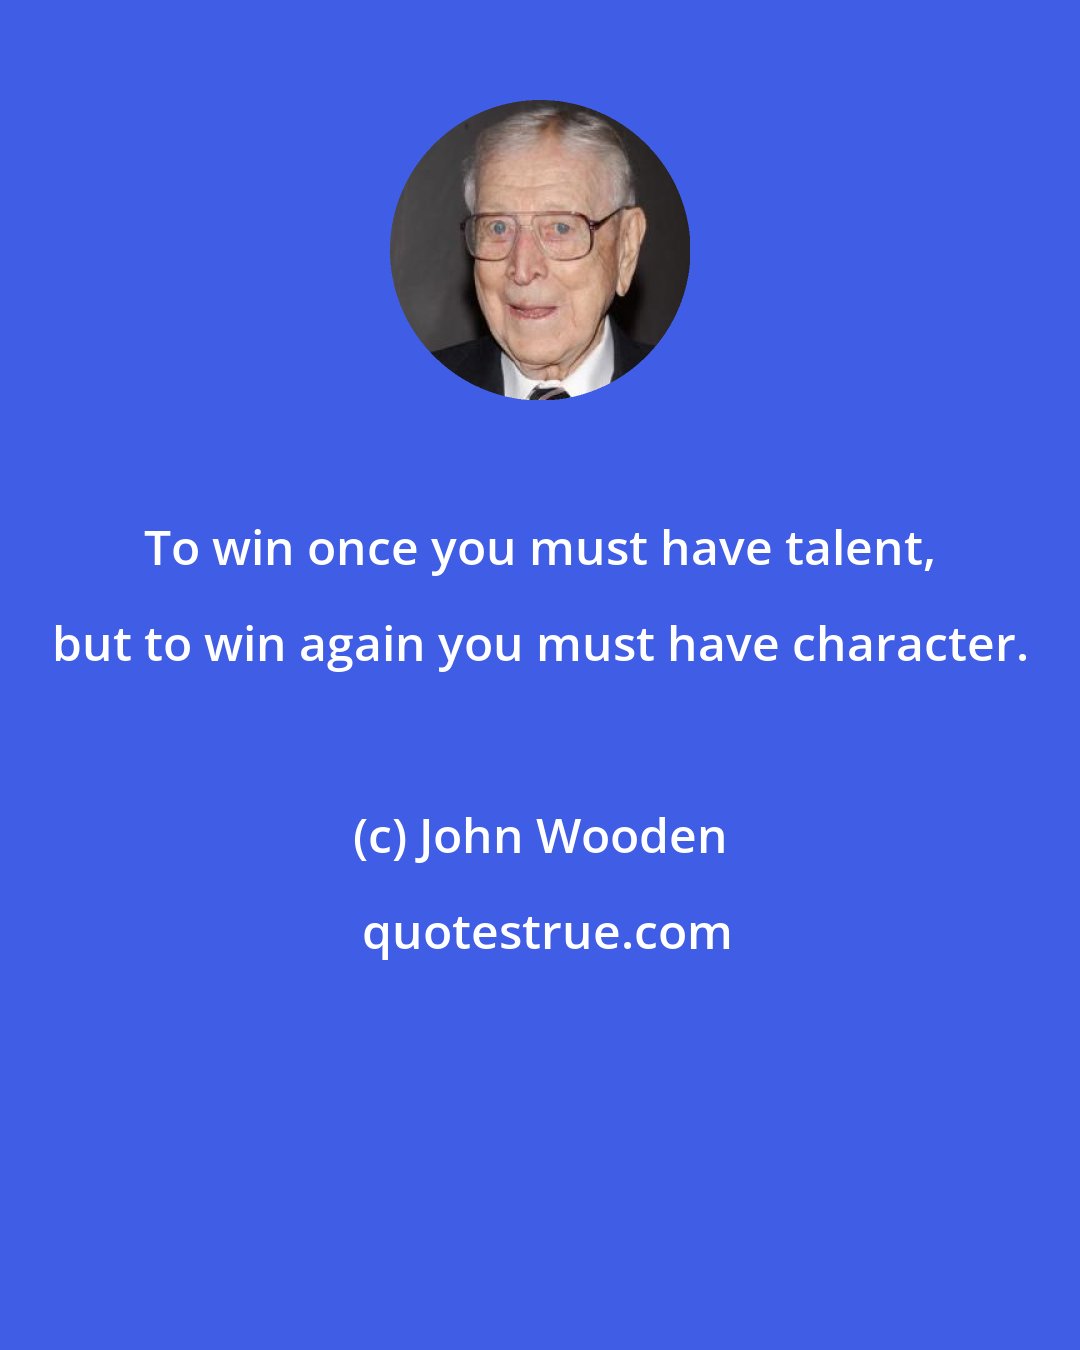 John Wooden: To win once you must have talent, but to win again you must have character.